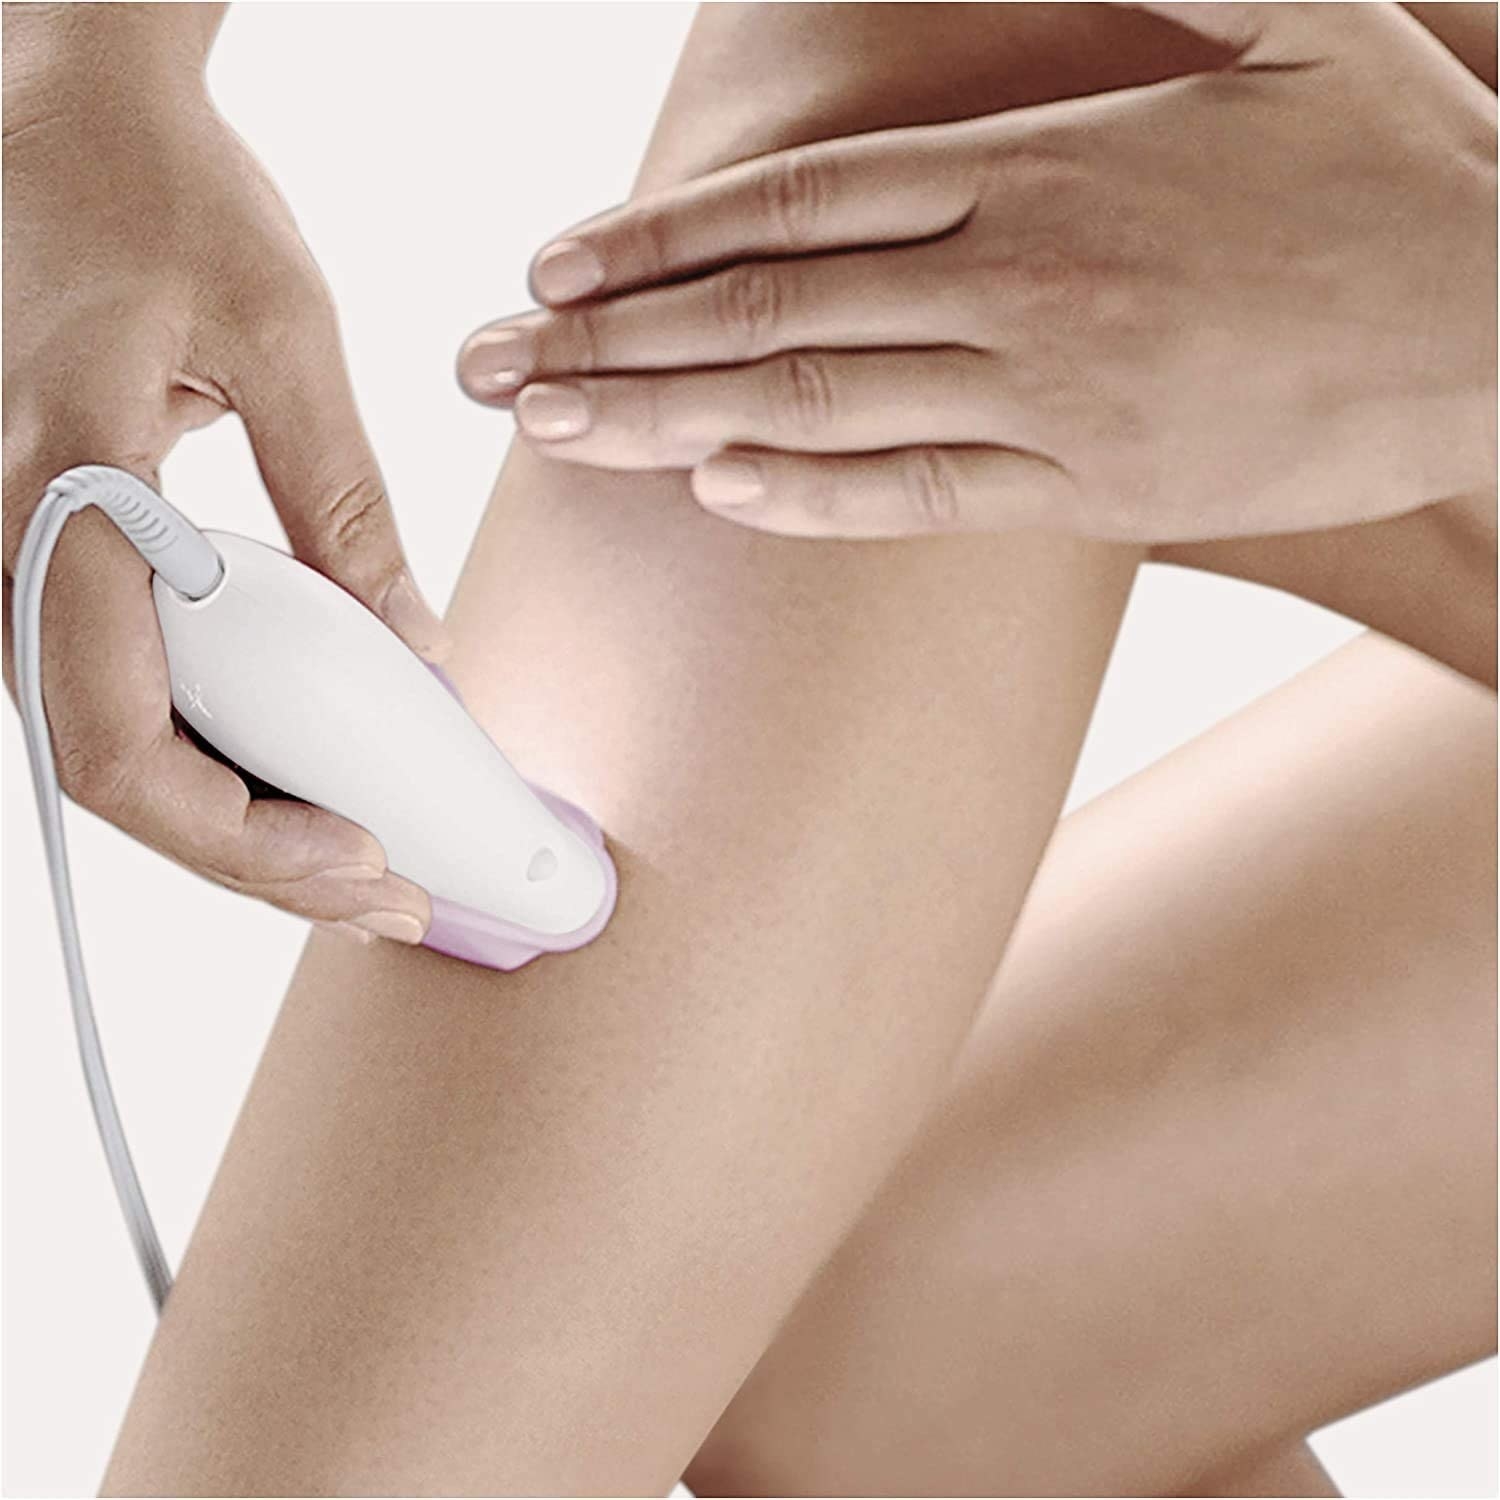 A model using the epilator on their legs